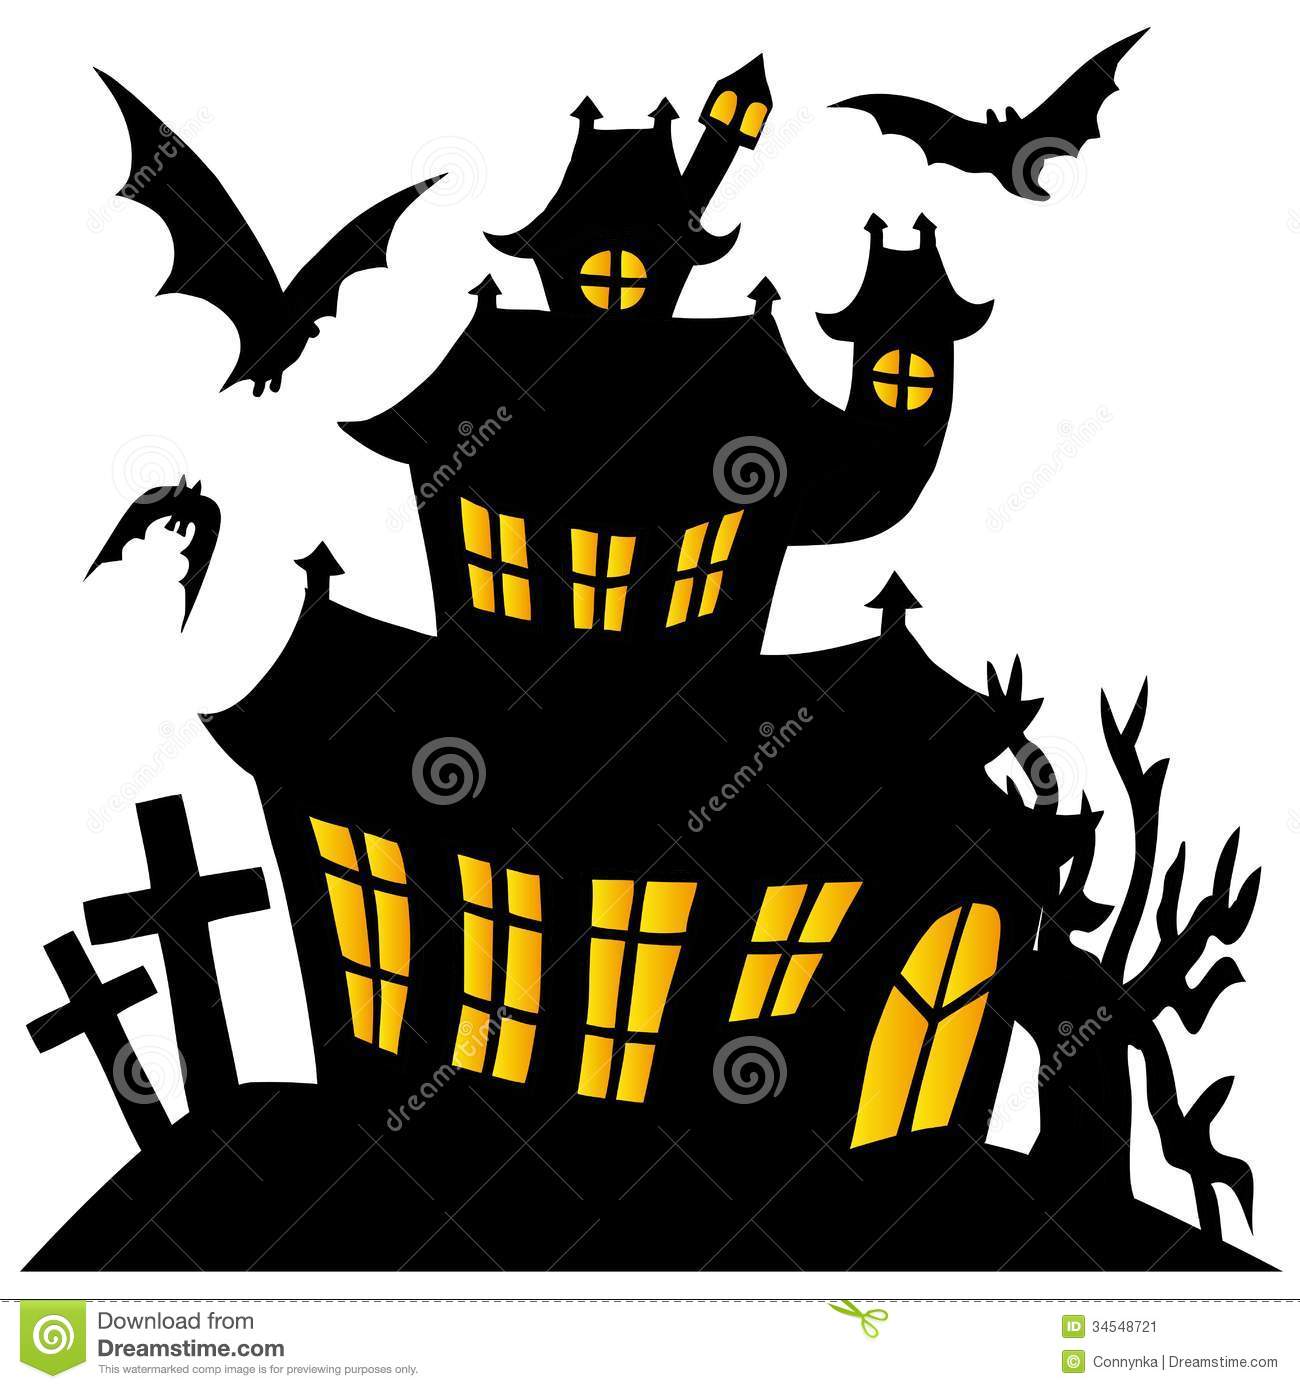 Haunted House Silhouette Silhouette Spooky House Vector Illustration